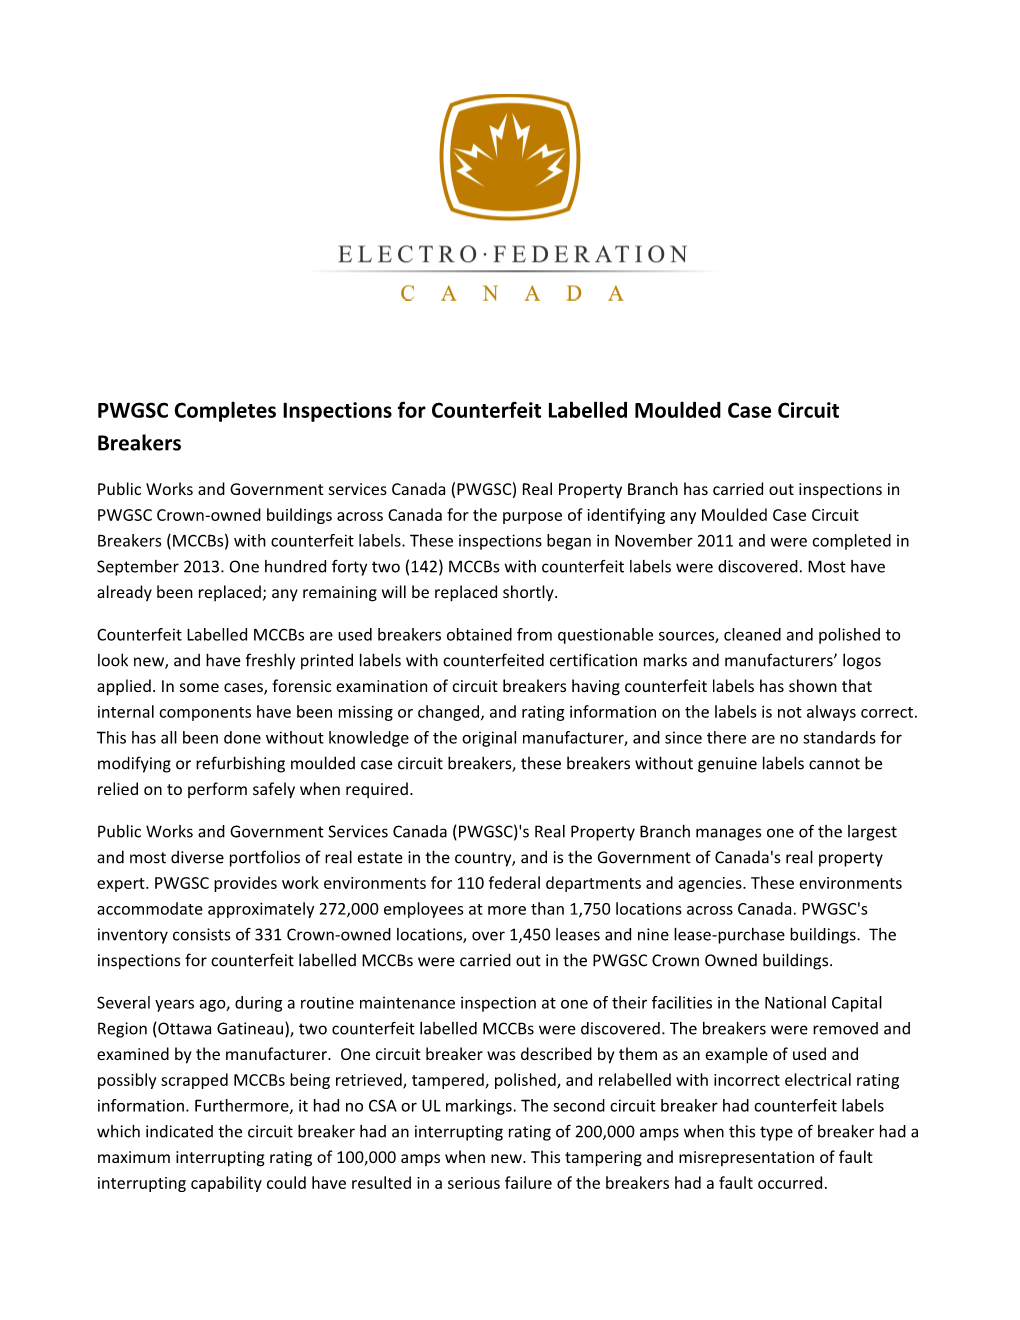 PWGSC Completes Inspections for Counterfeit Labelled Moulded Case Circuit Breakers